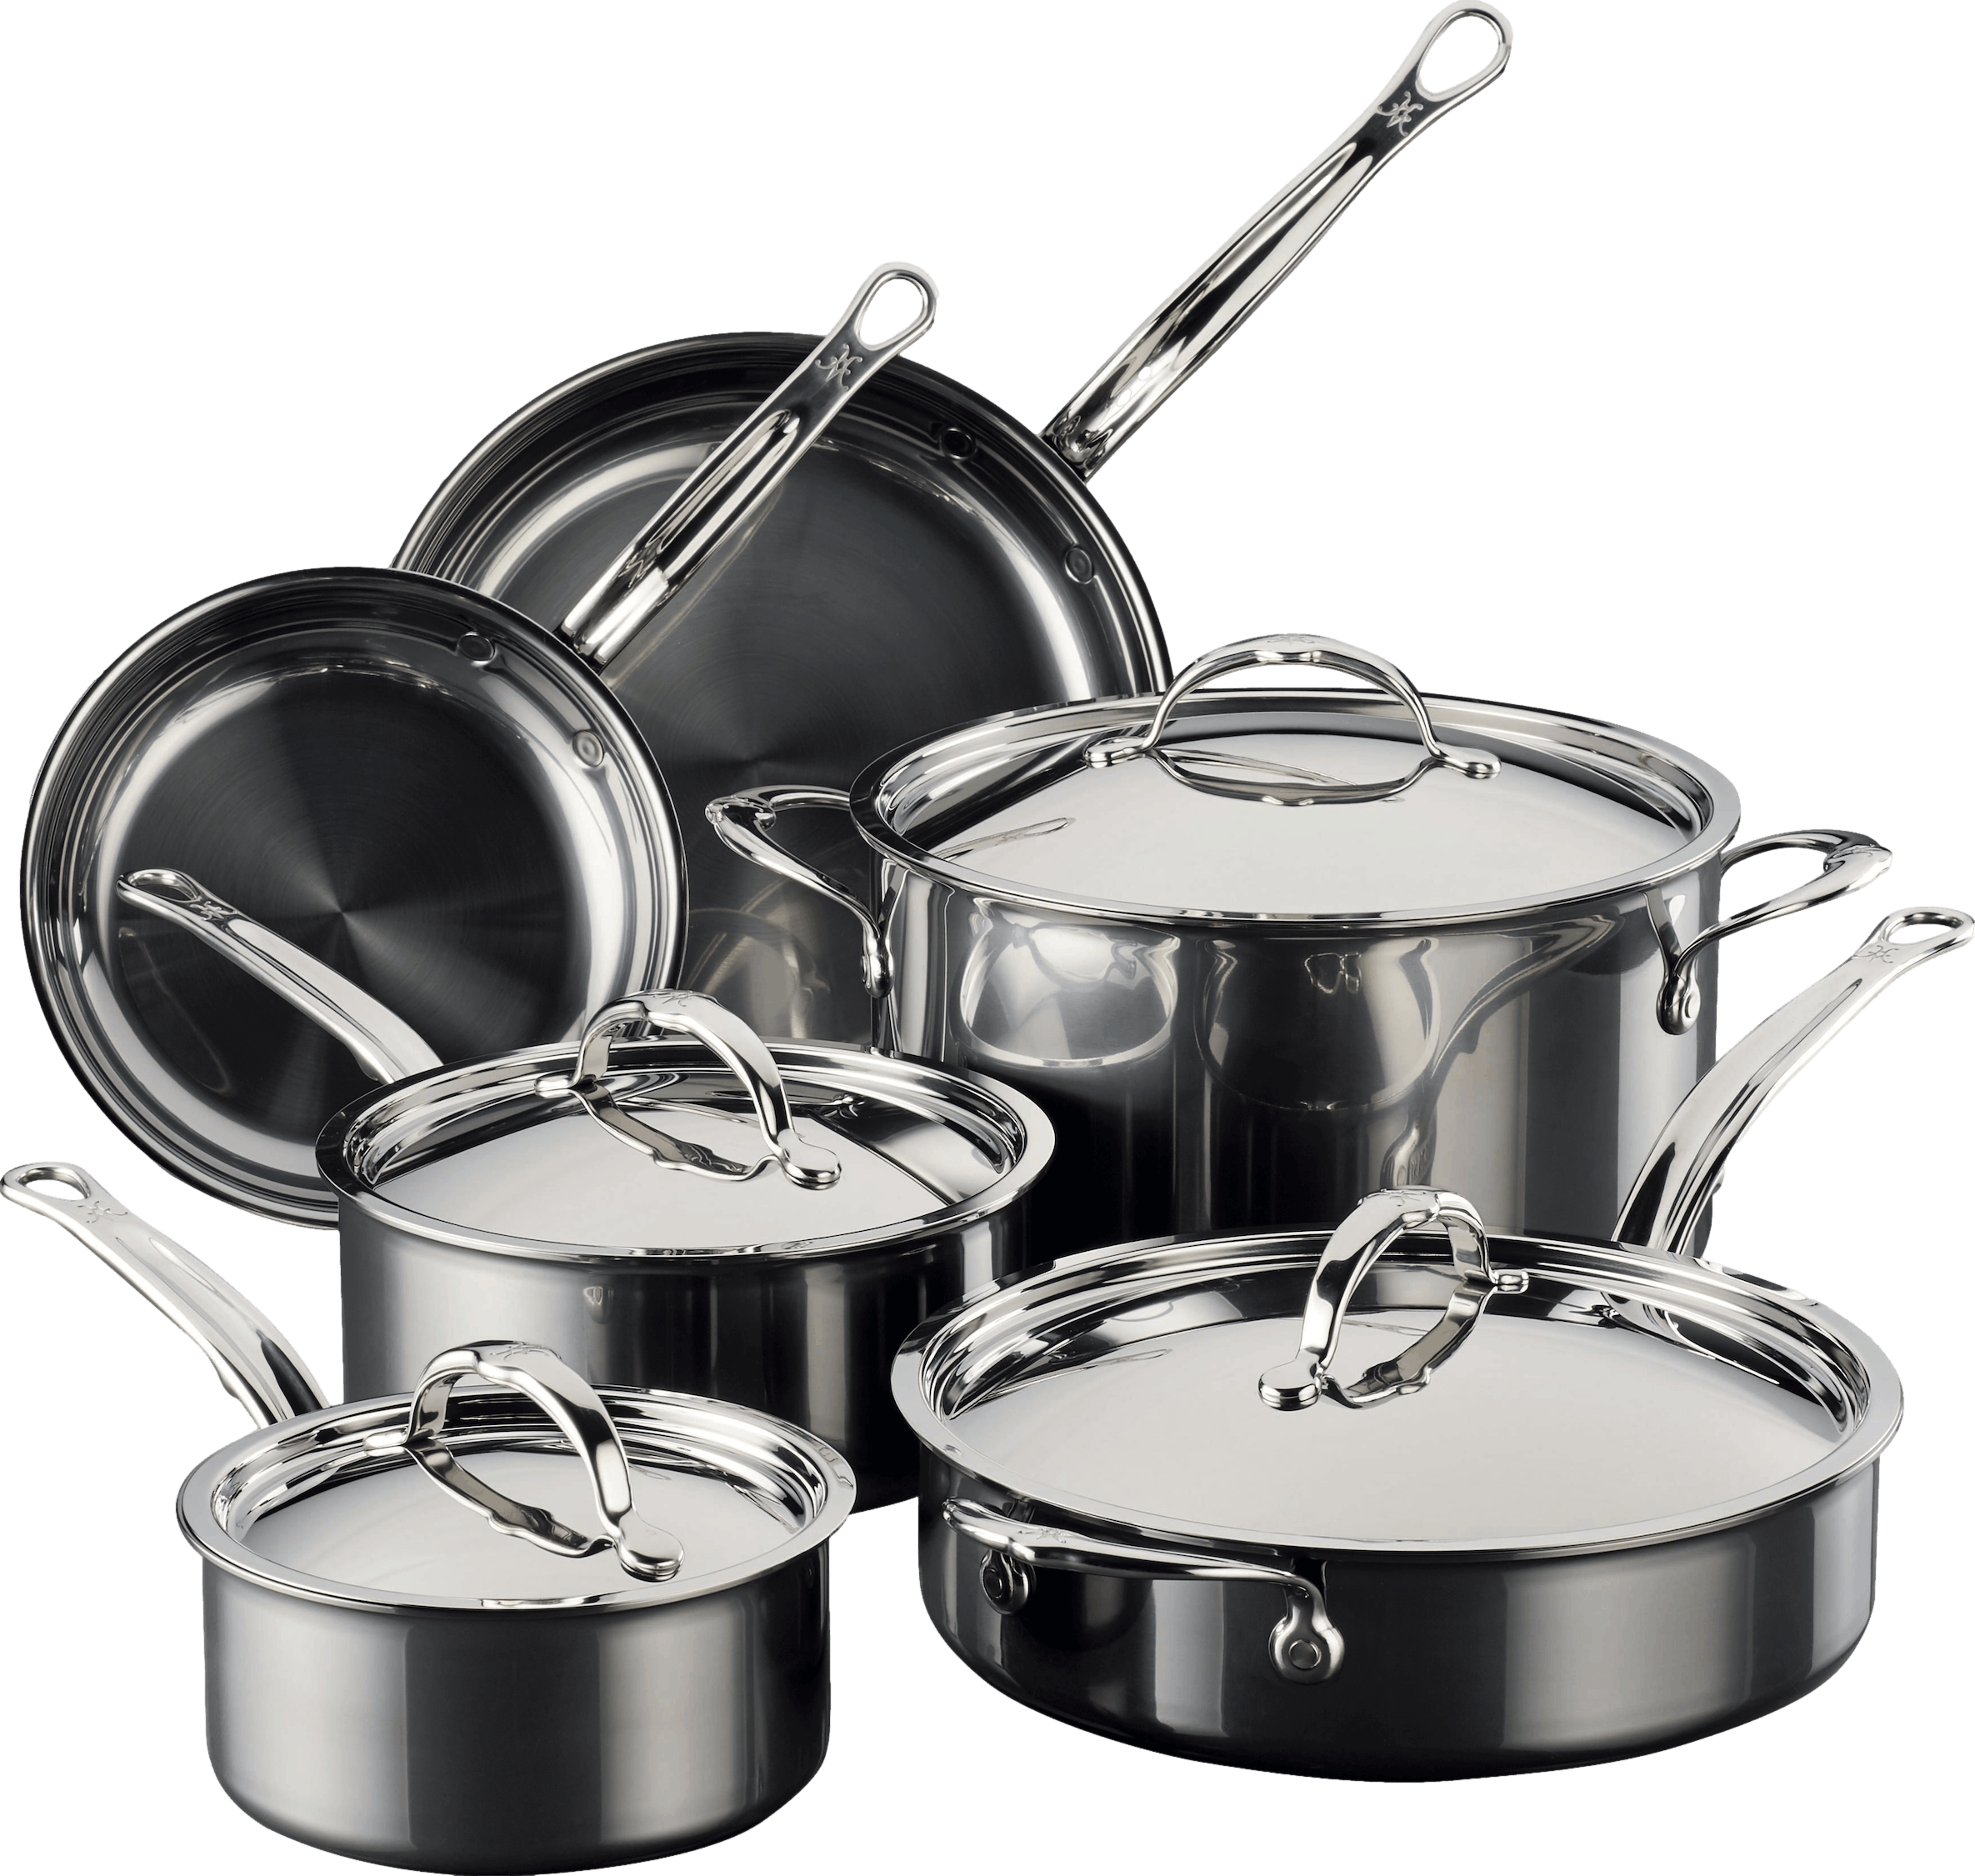 High Quality Italian Cookware, Choose a wide variety of pro…